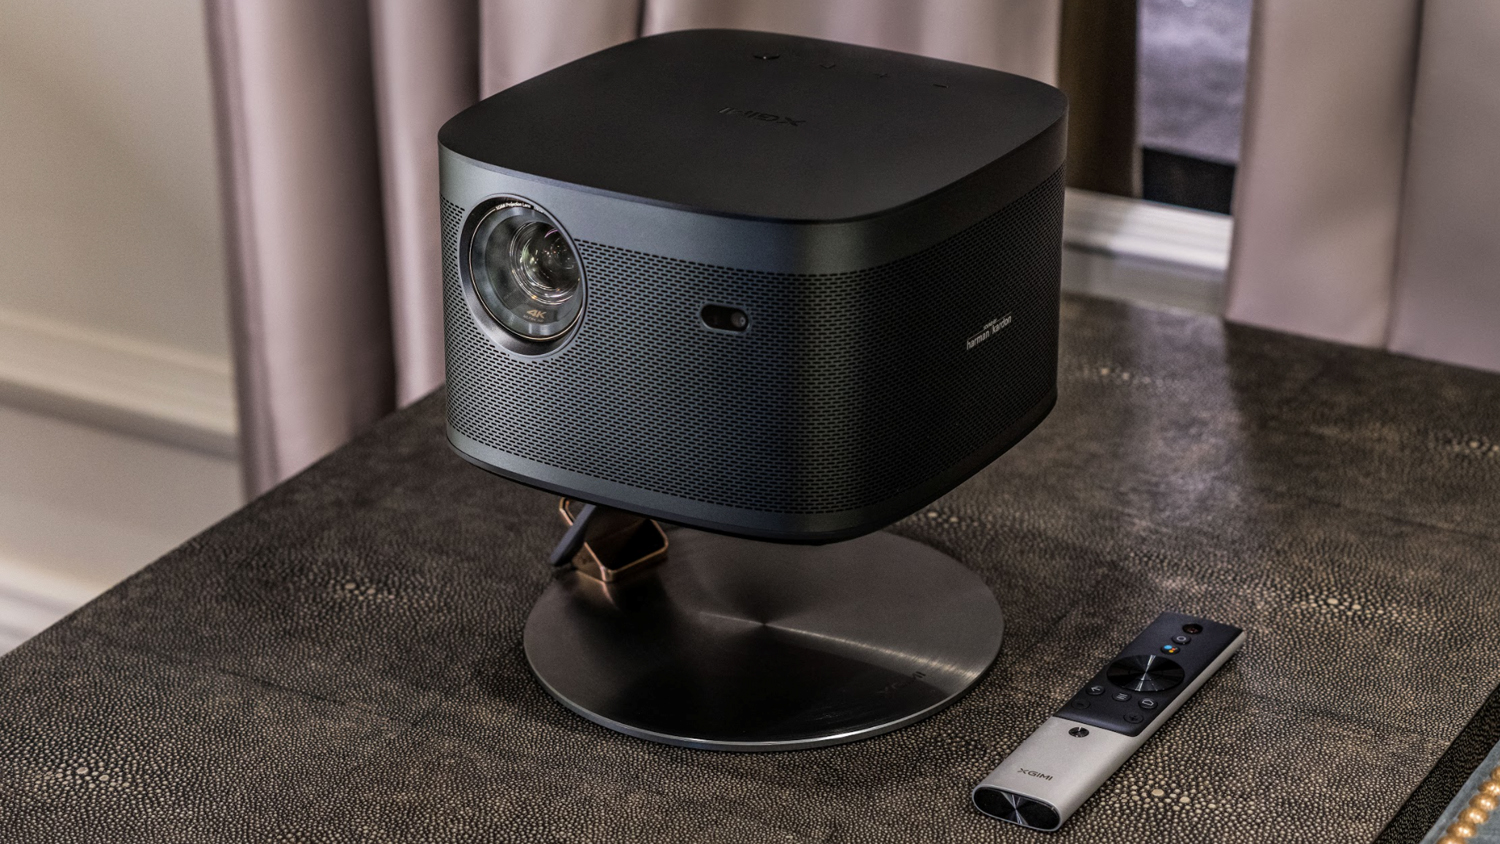 xgimi-horizon-pro-is-a-4k-portable-projector-aimed-at-a-luxury-lifestyle